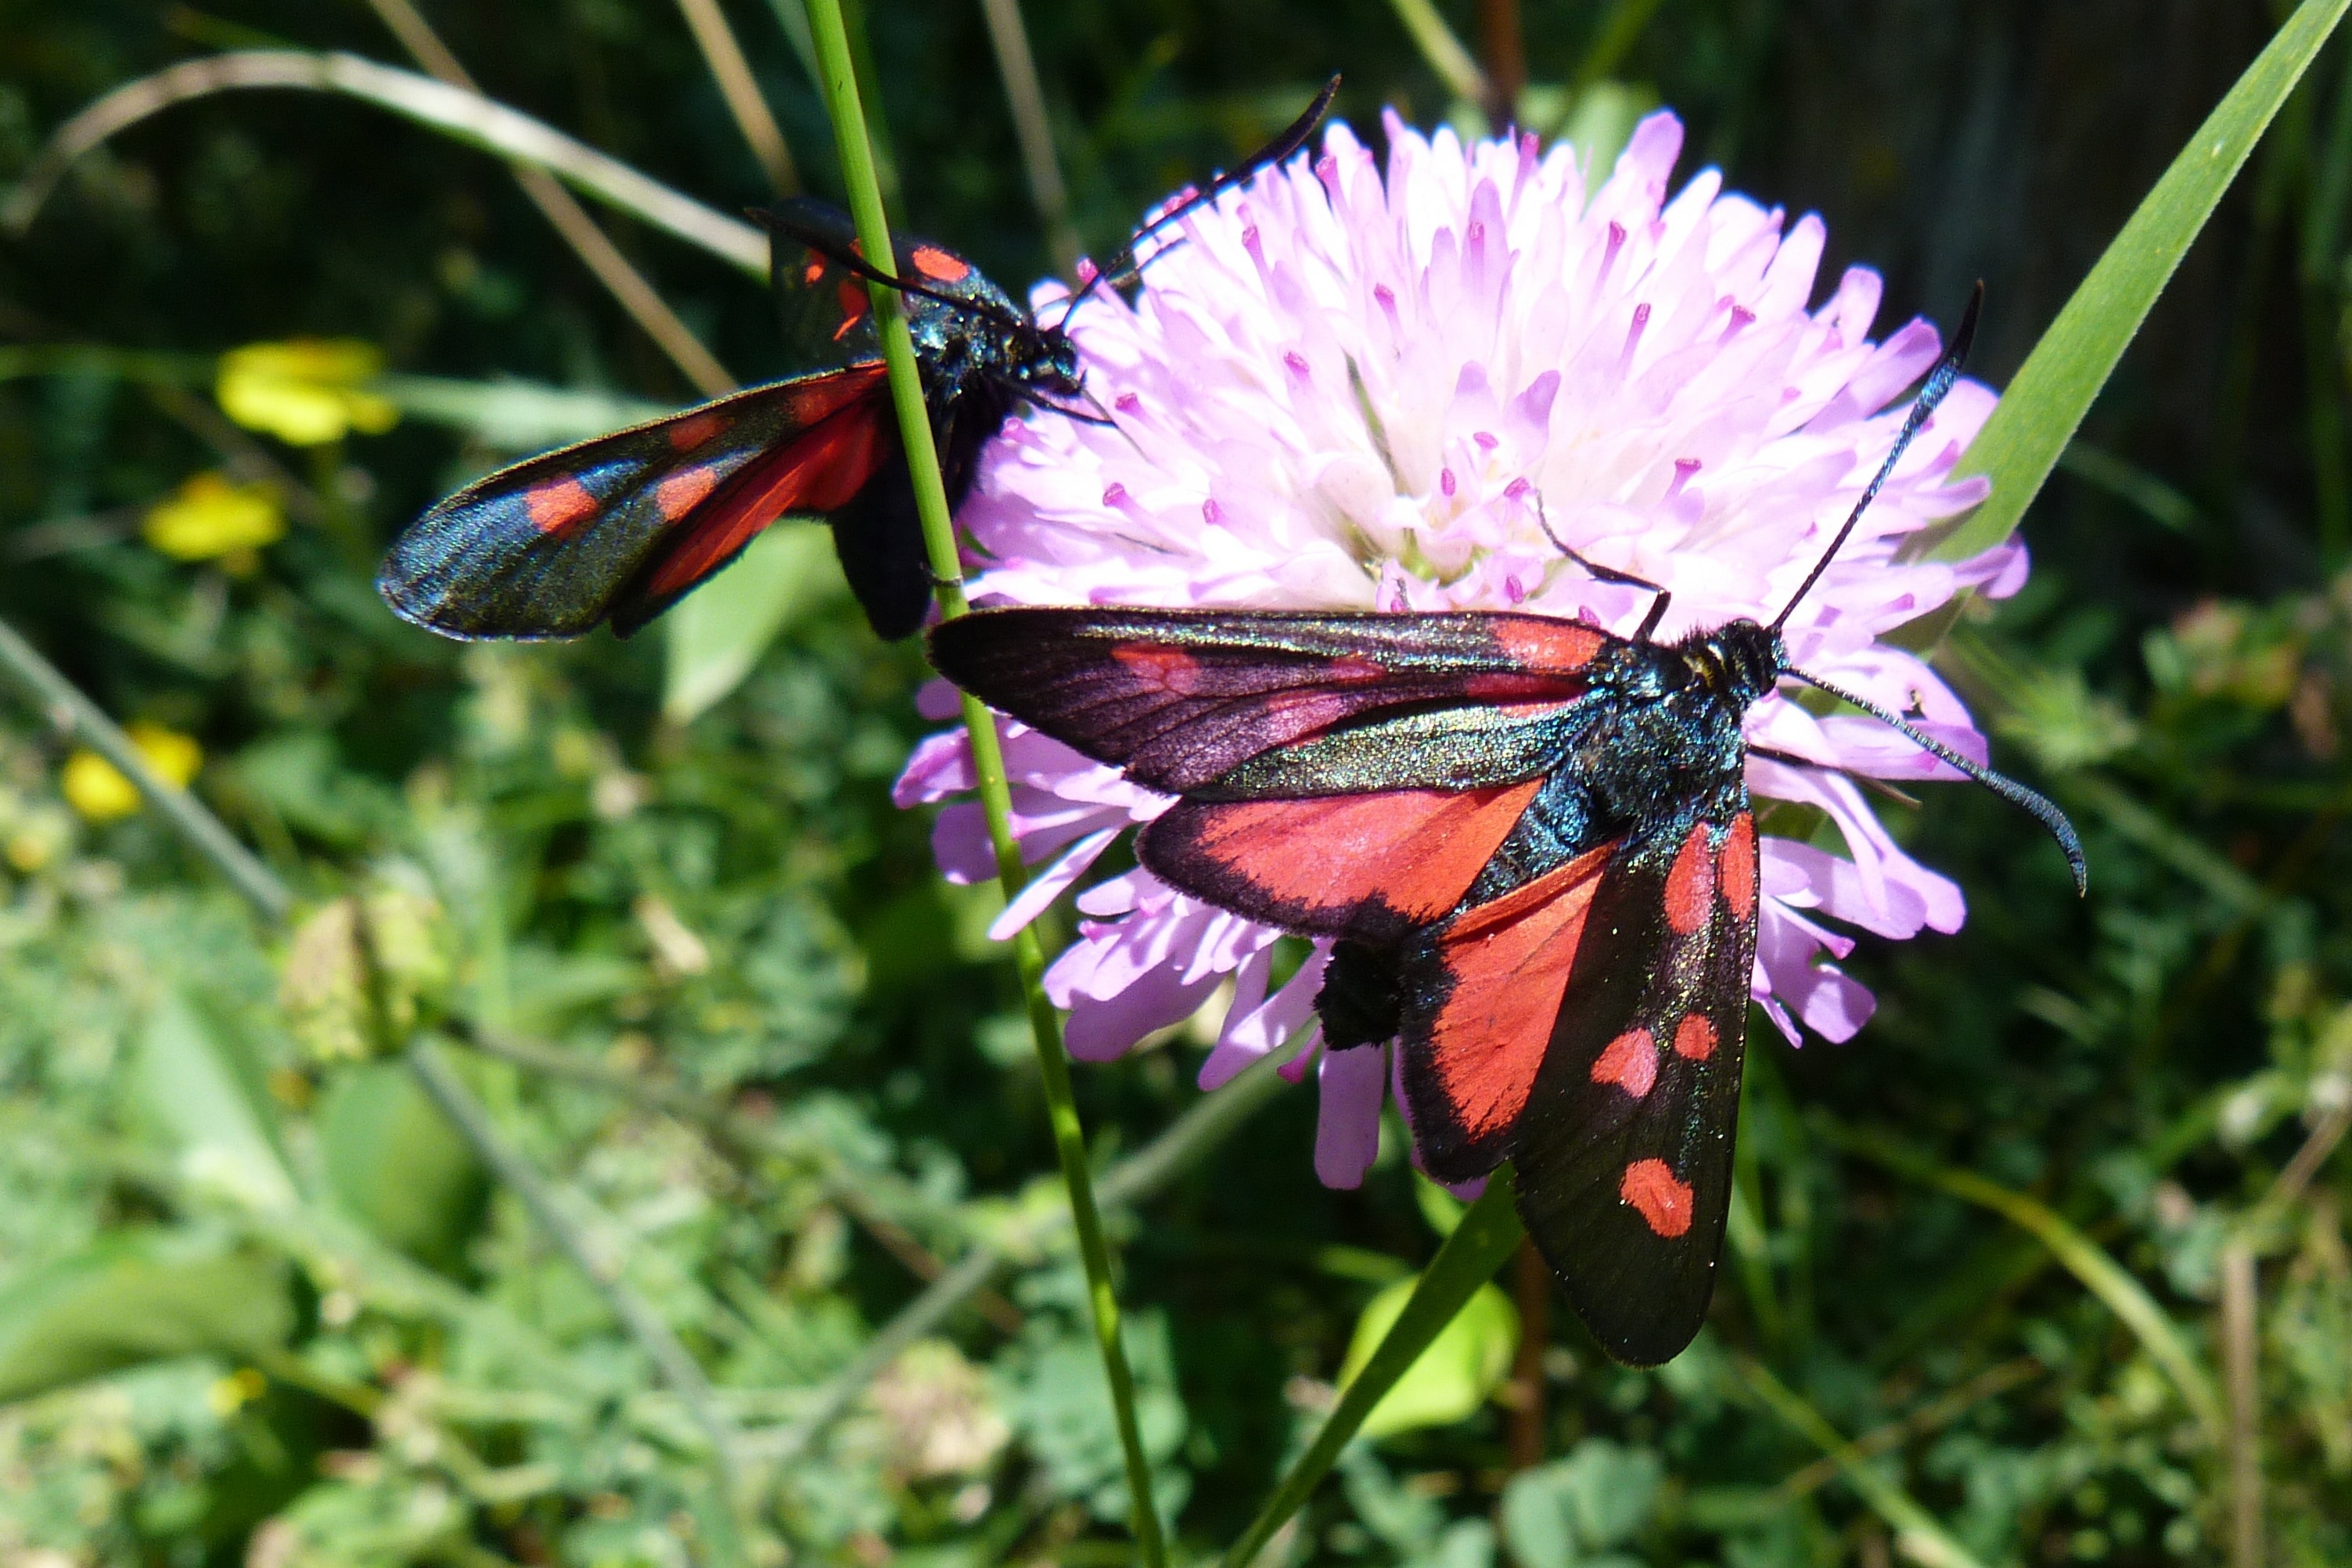 Zygaena Purpuralis, Insects, Butterflies, insect, flower